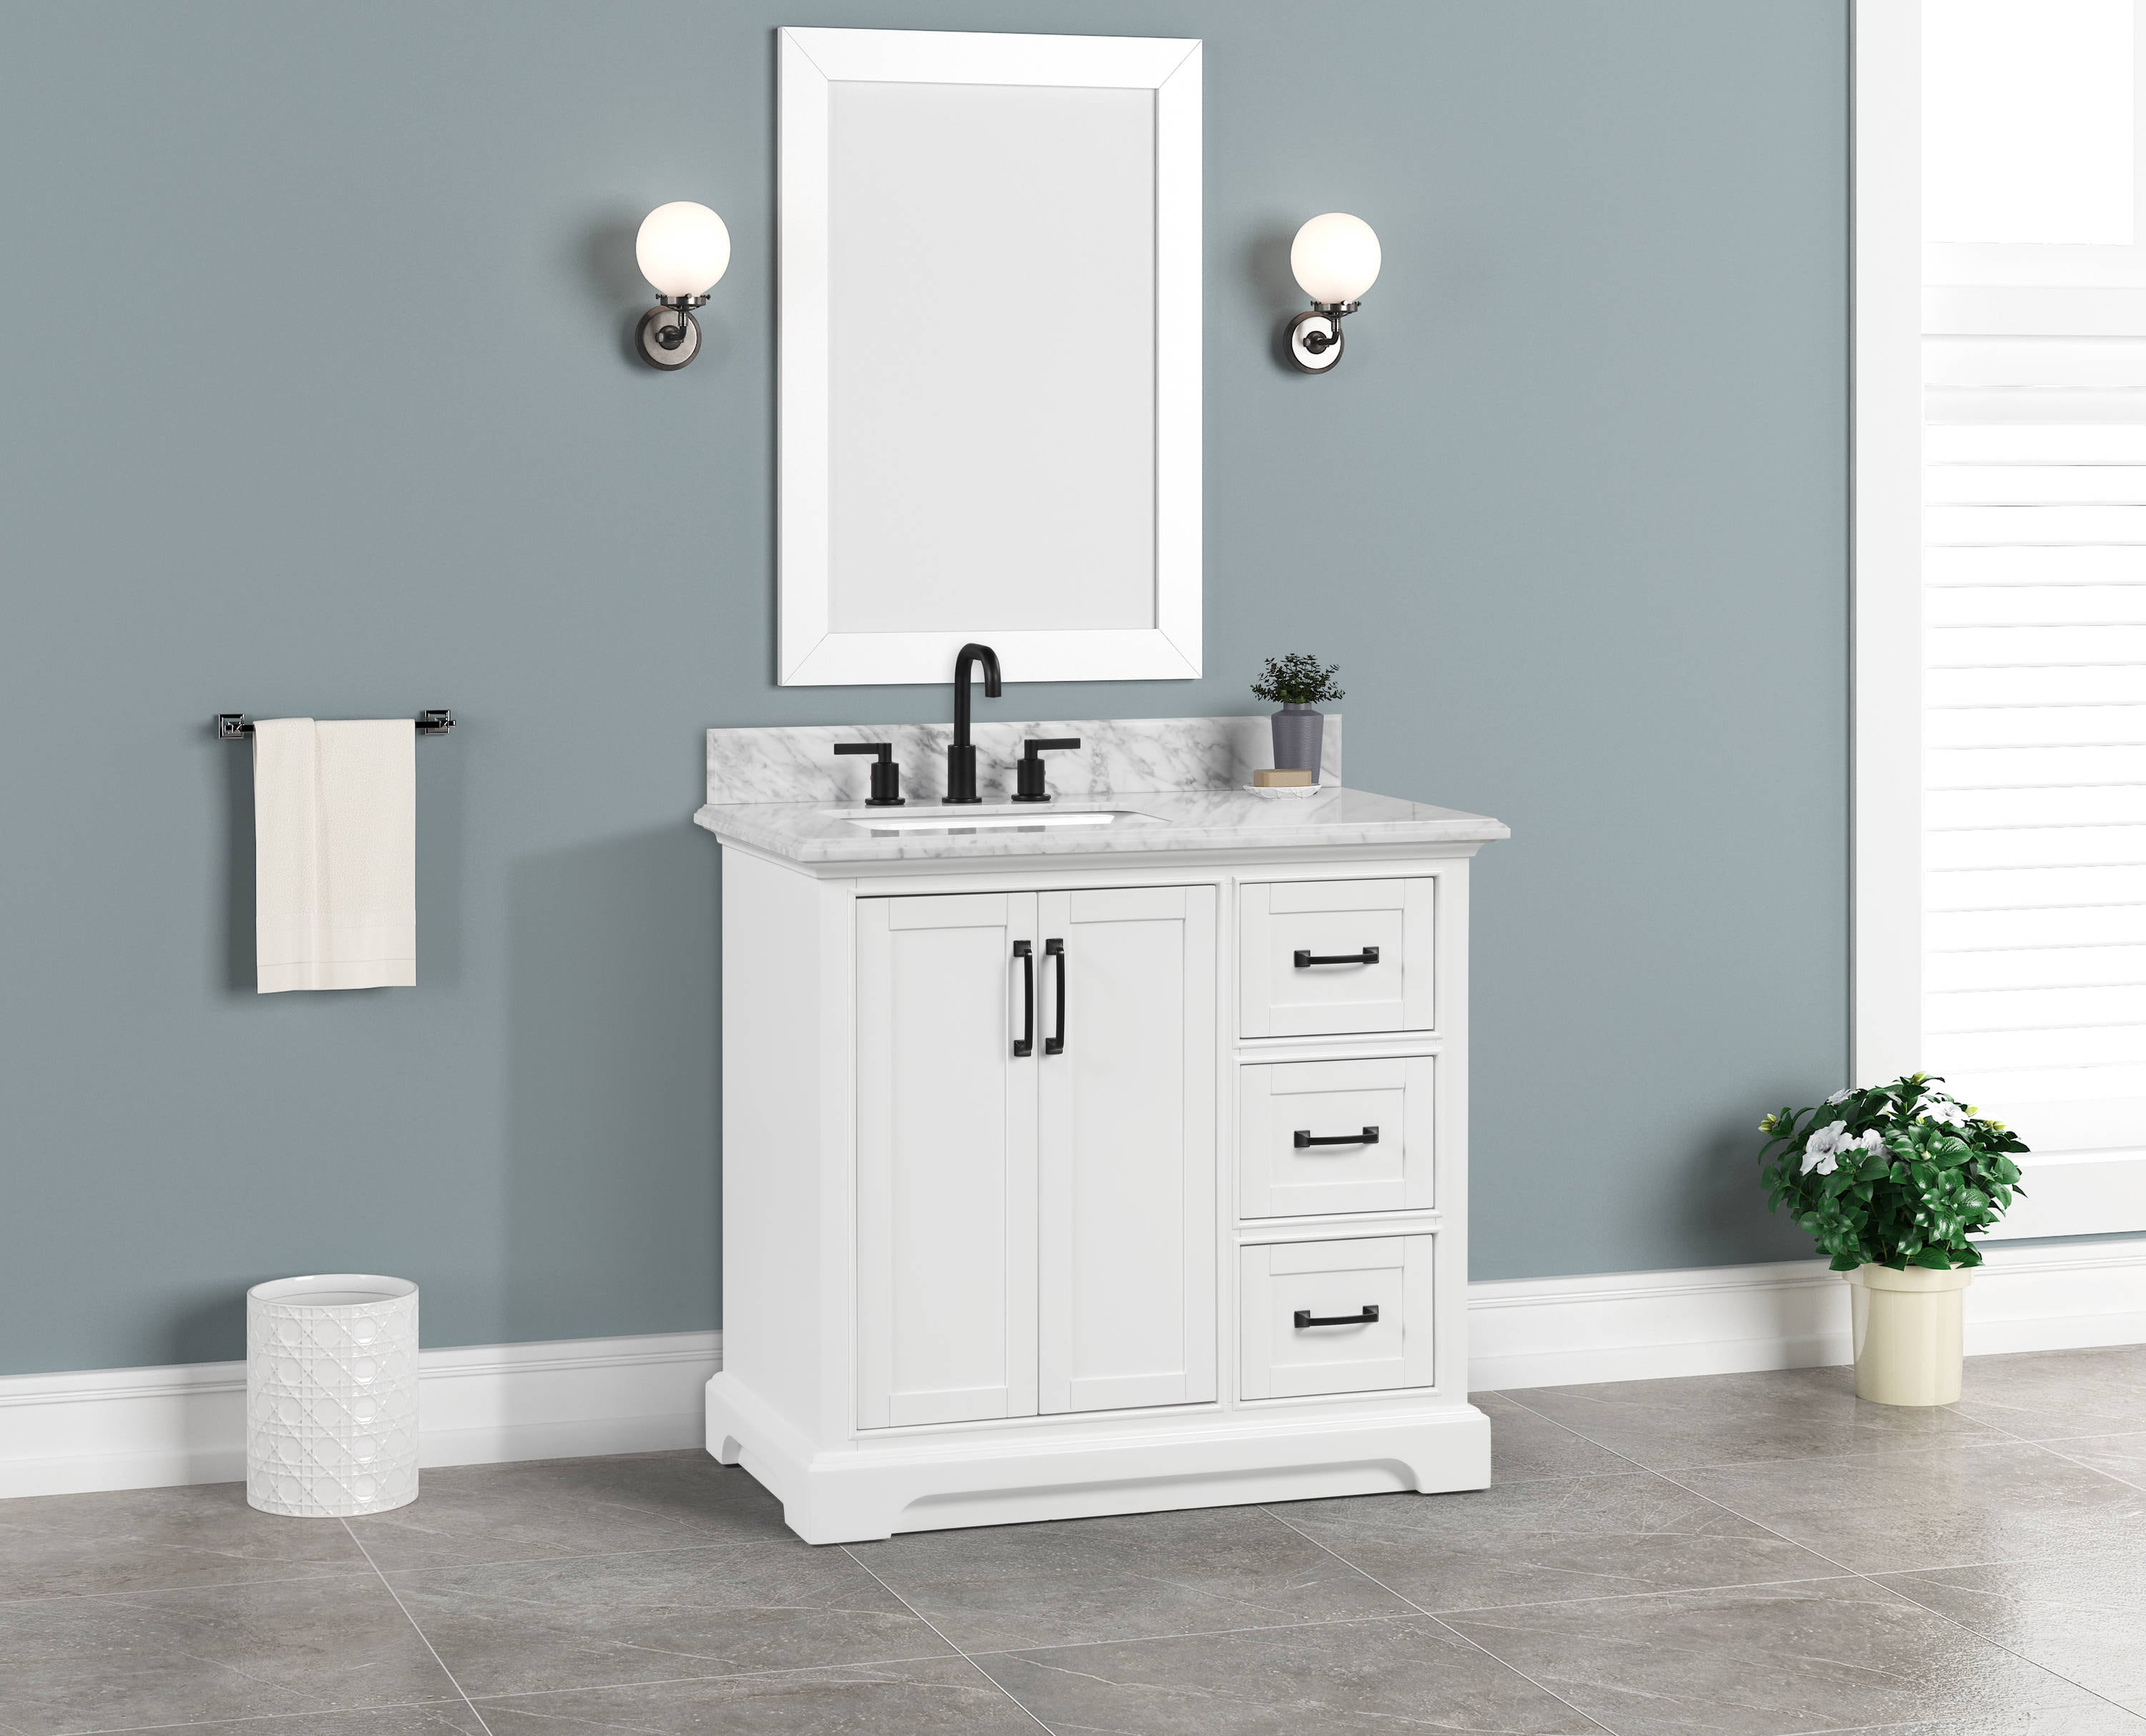 Allen Roth St John 36 In Carrara White Undermount Single Sink Bathroom Vanity With Natural Marble Top The Vanities Tops Department At Lowes Com